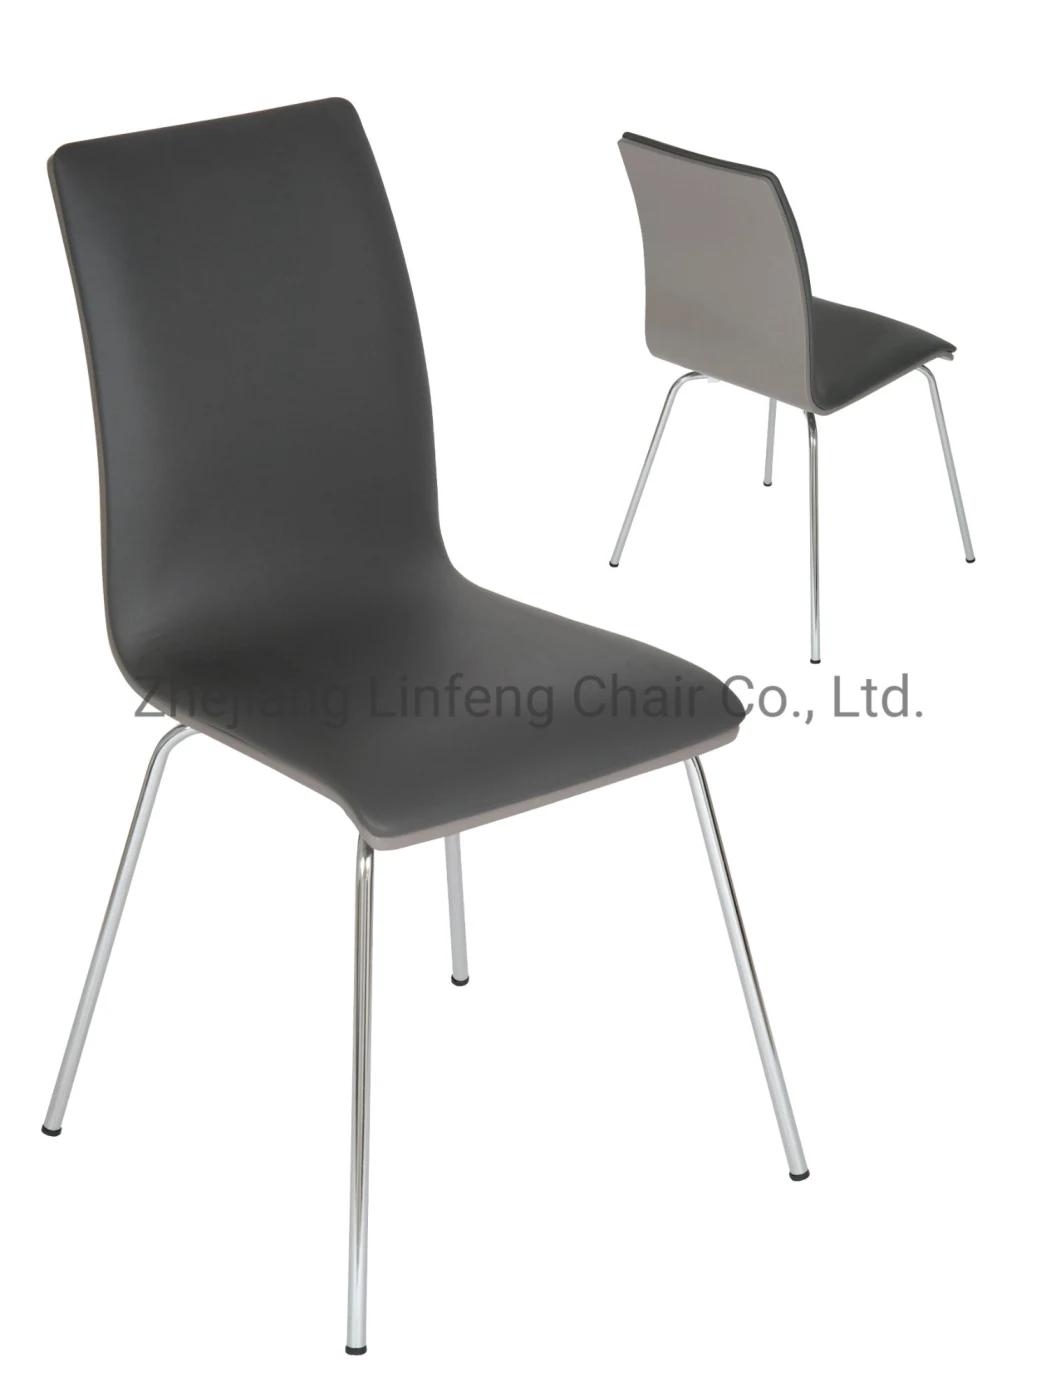 Used Modern Restaurant Cafe Furniture Metal Wood Dining Chair Stack Restaurant Plywood Chair